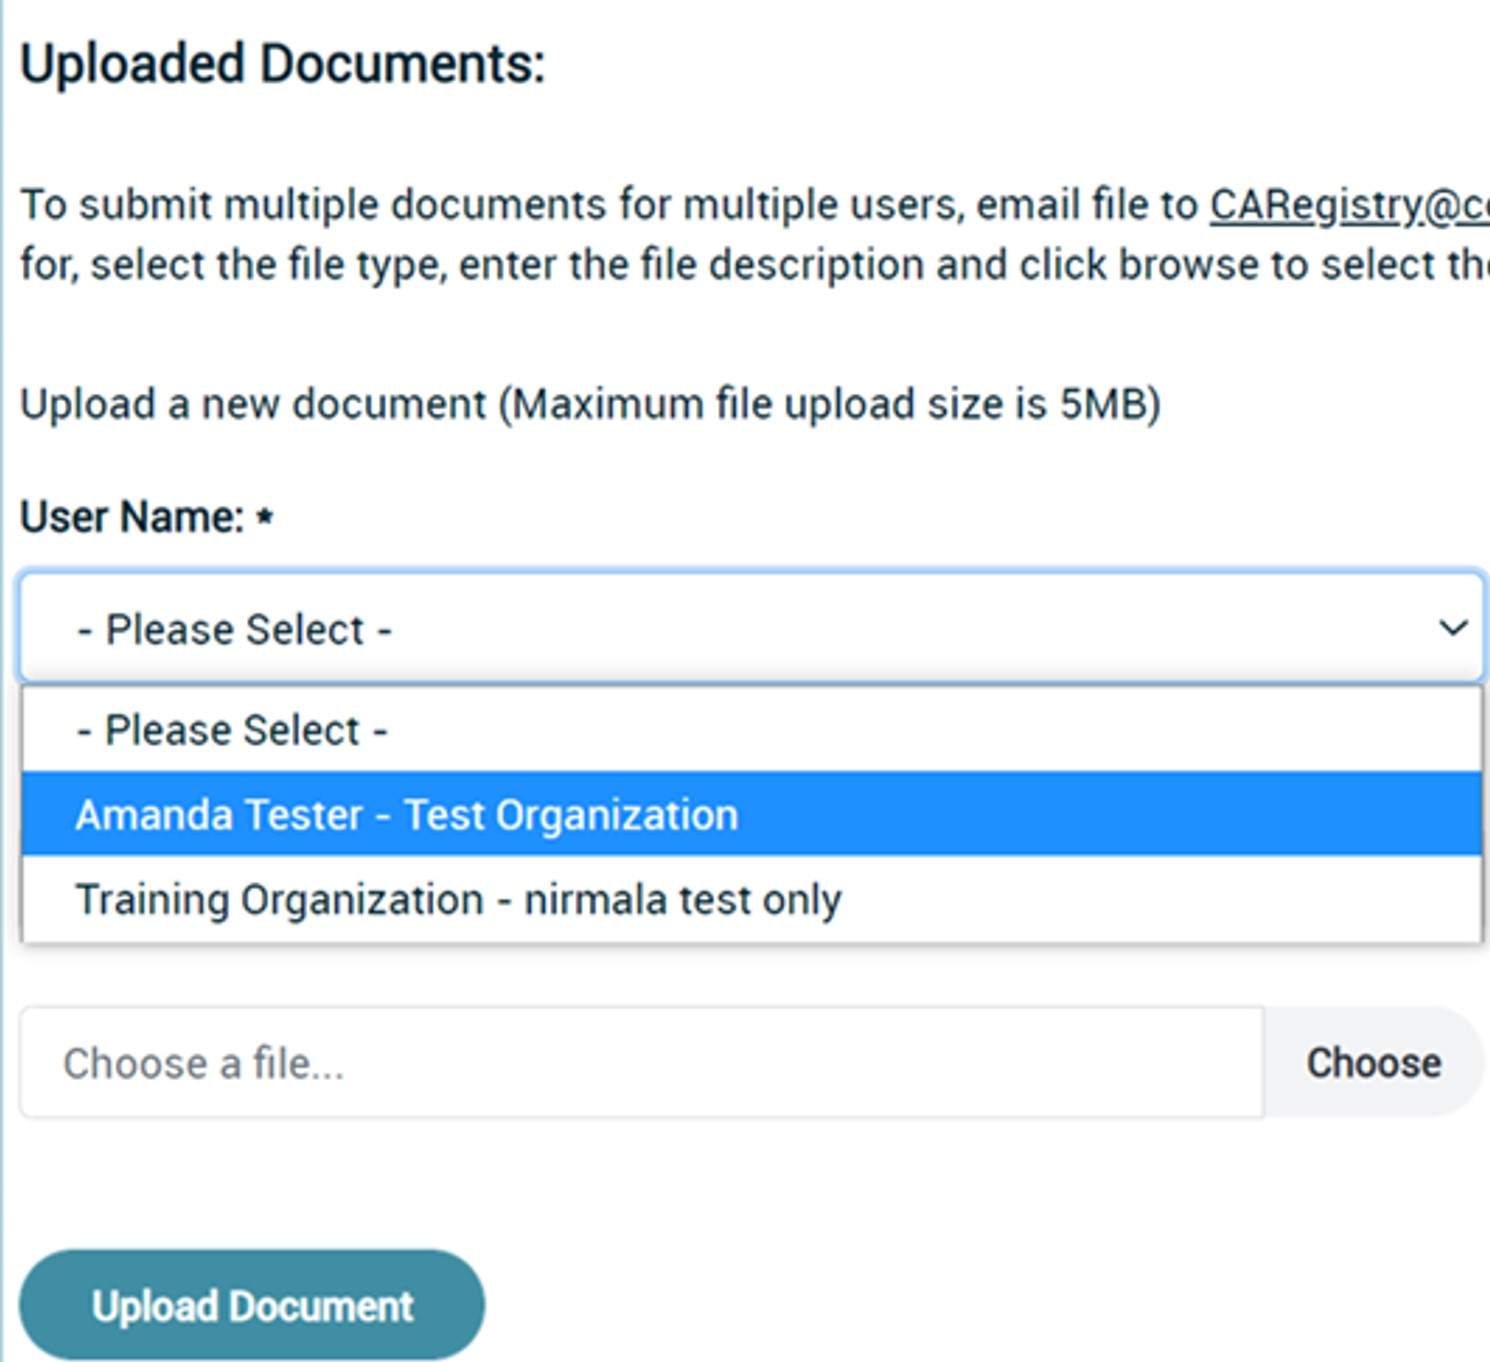 Shows dropdown menu of staff names that can be selected when uploading documents for staff.